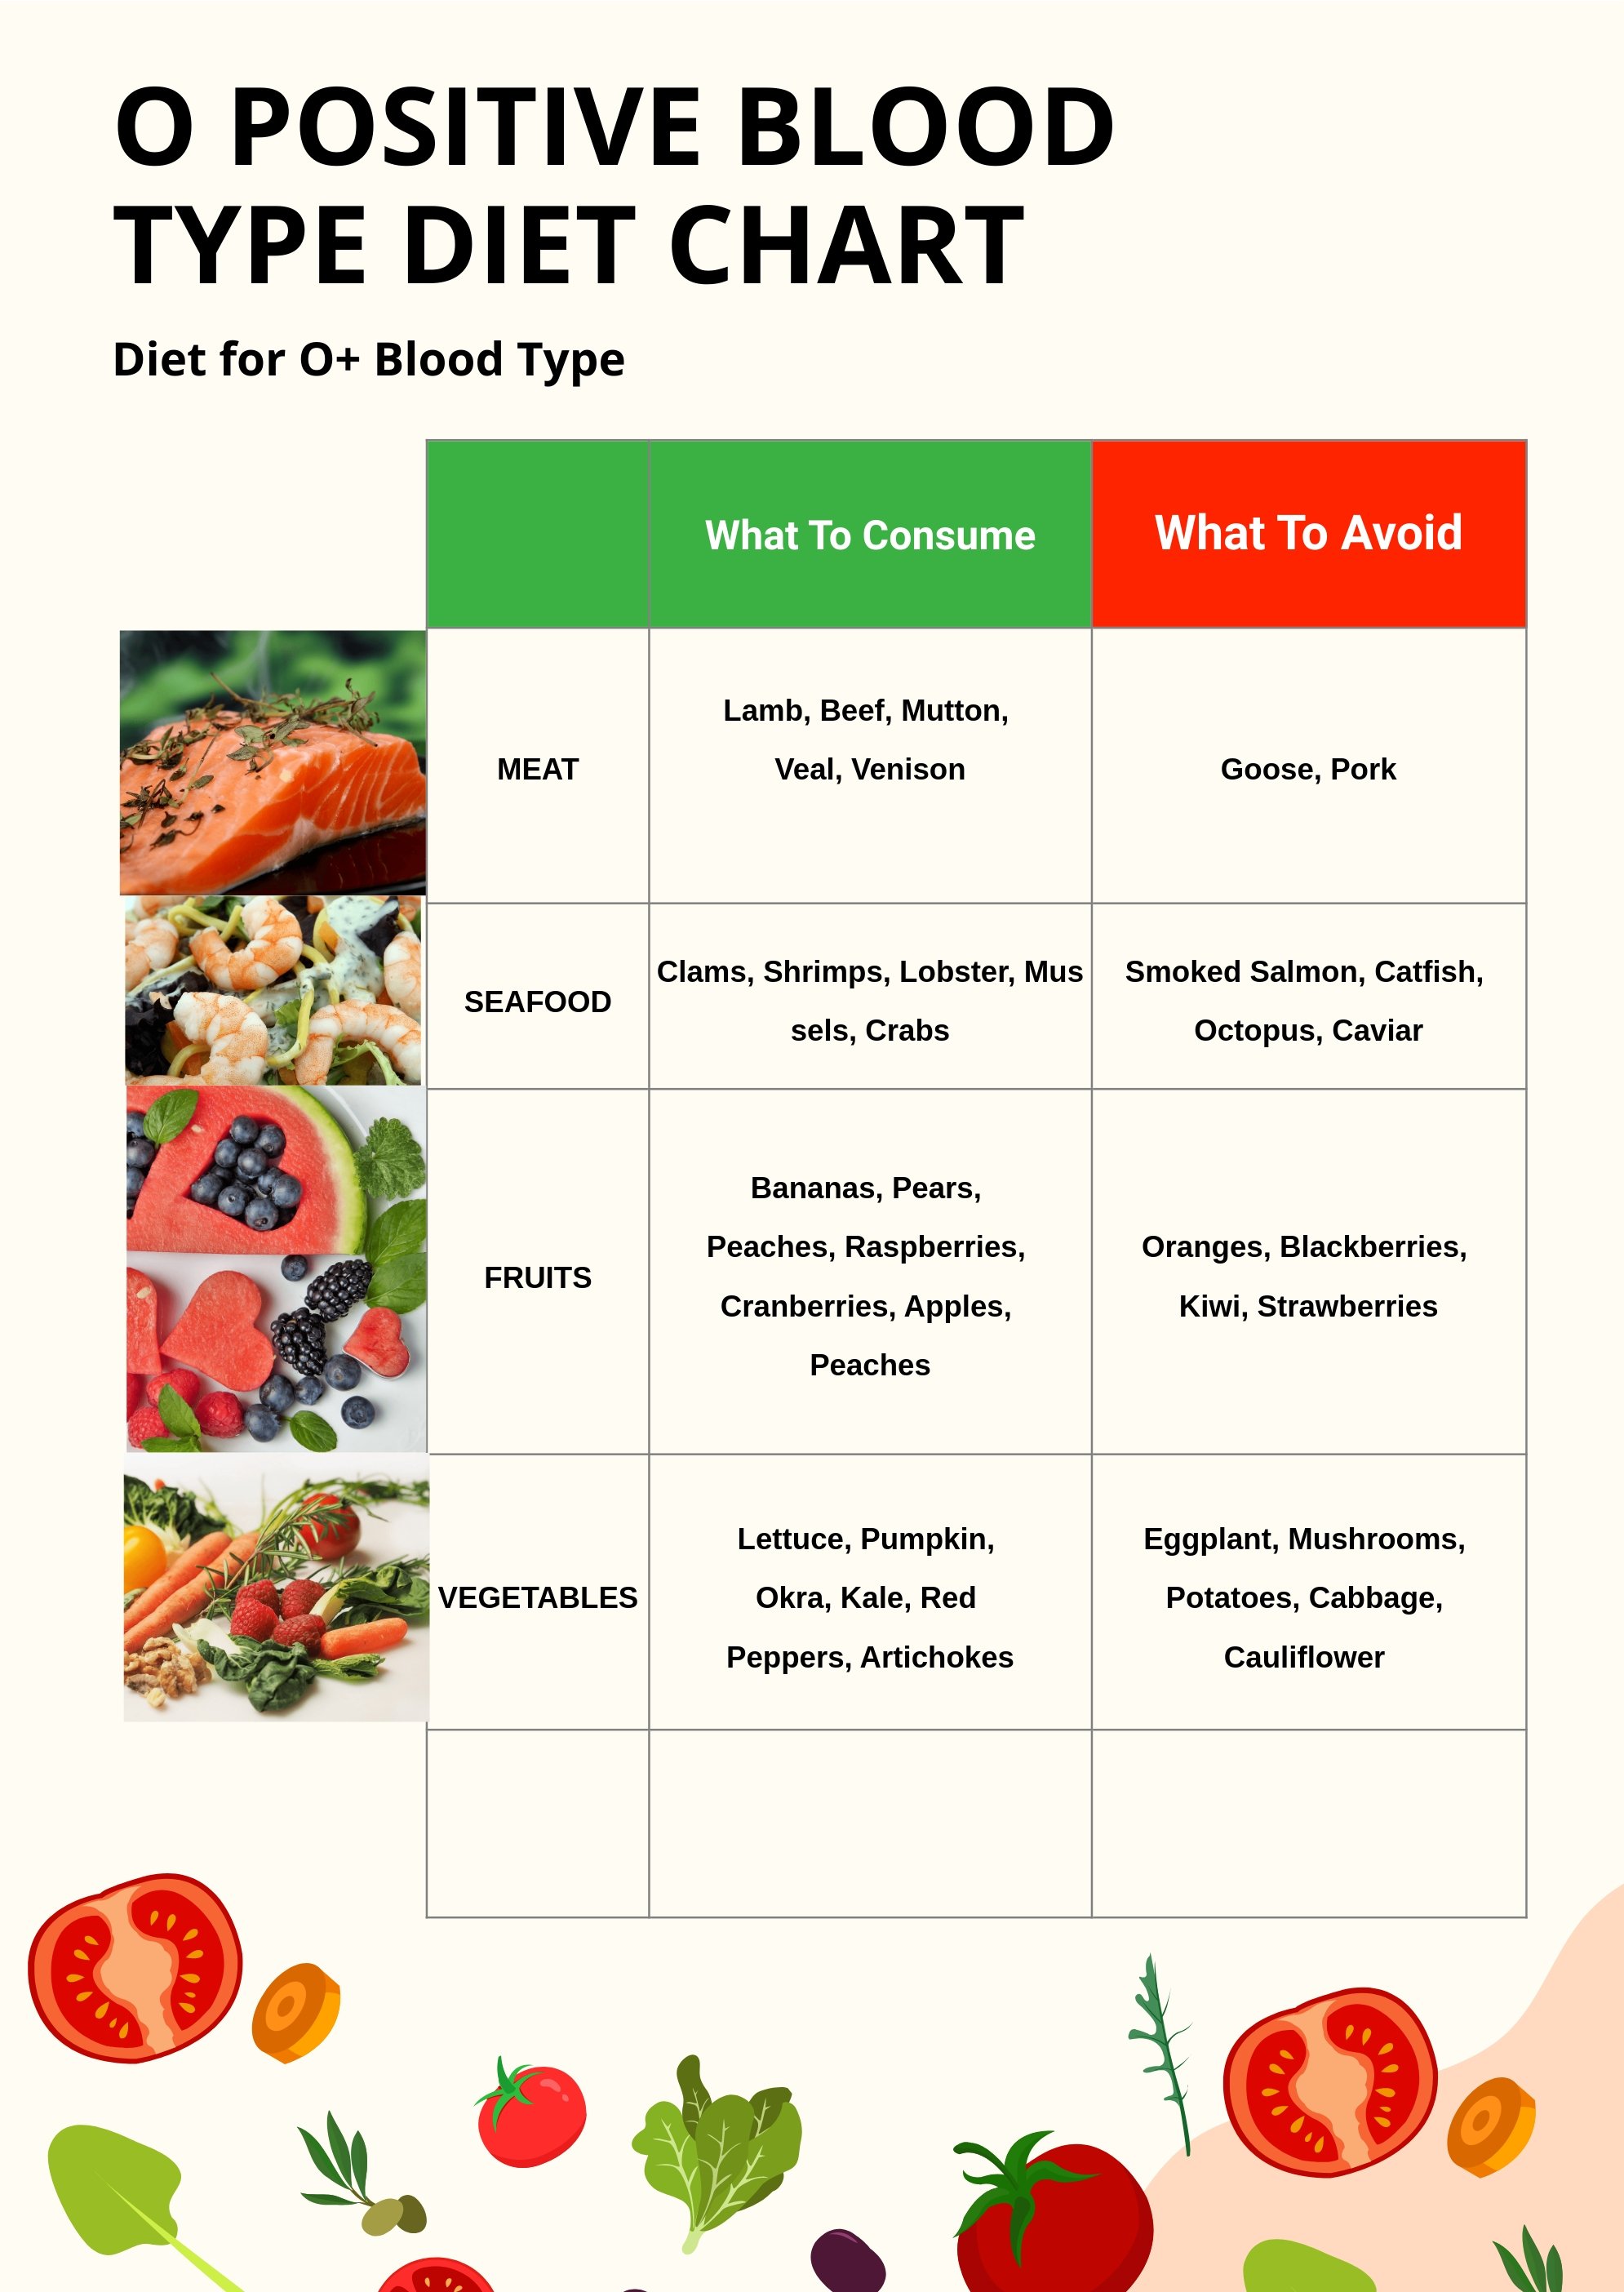 O Positive Blood Type Diet Chart